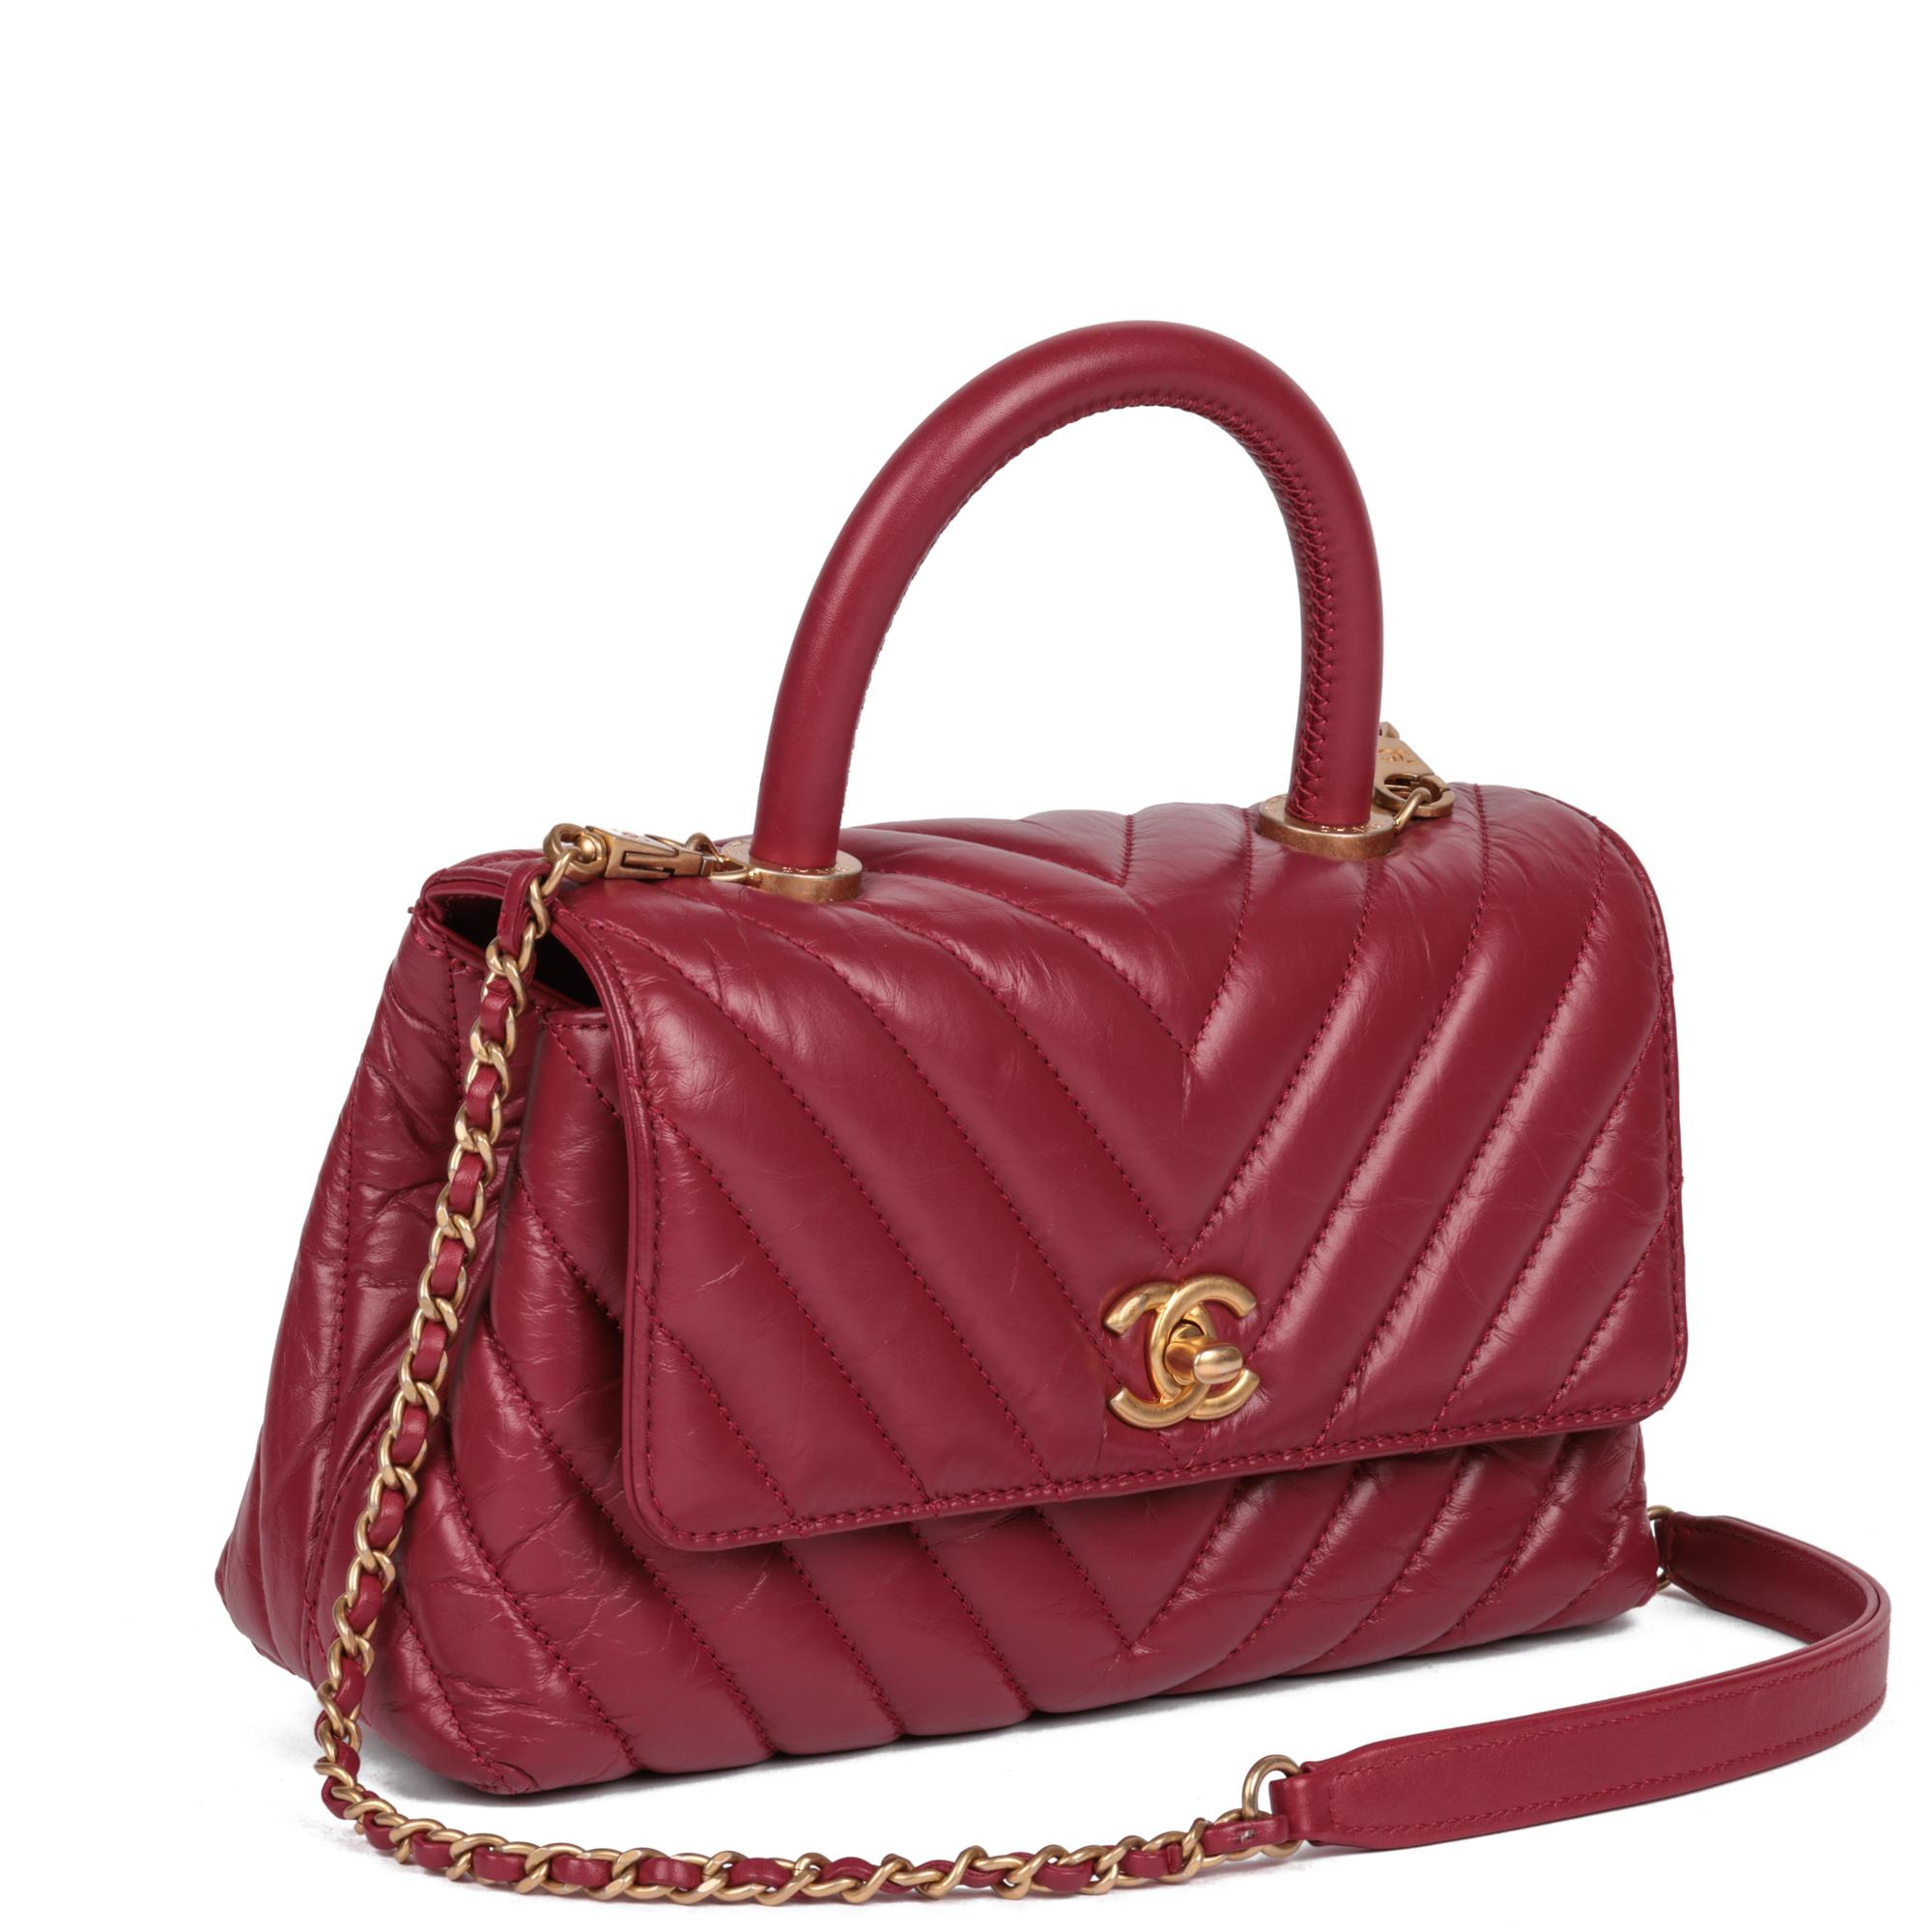 Chanel
Red Chevron Aged Calfskin Leather Small Coco Top Handle

Xupes Reference: HB5169
Serial Number: 26814854
Age (Circa): 2018
Accompanied By: Chanel Dust Bag, Authenticity Card
Authenticity Details: Authenticity Card, Serial Sticker (Made in